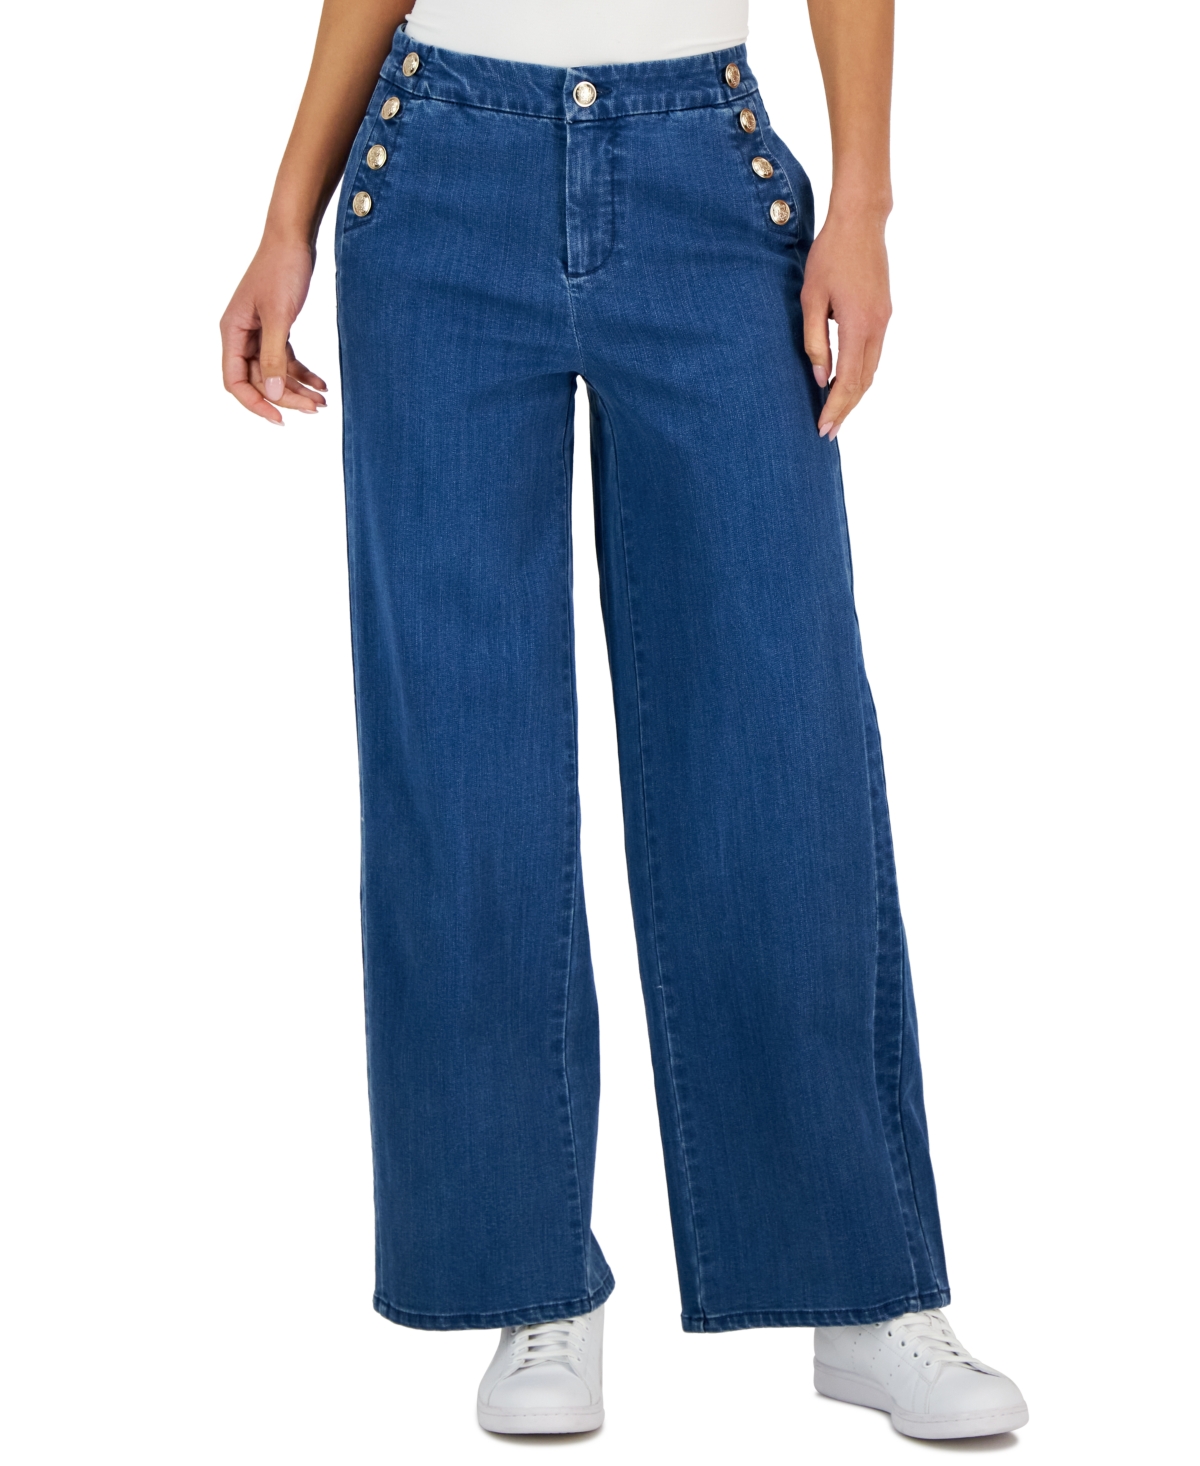  Charter Club Women's High-Rise Wide-Leg Button Jeans, Created for Macy's